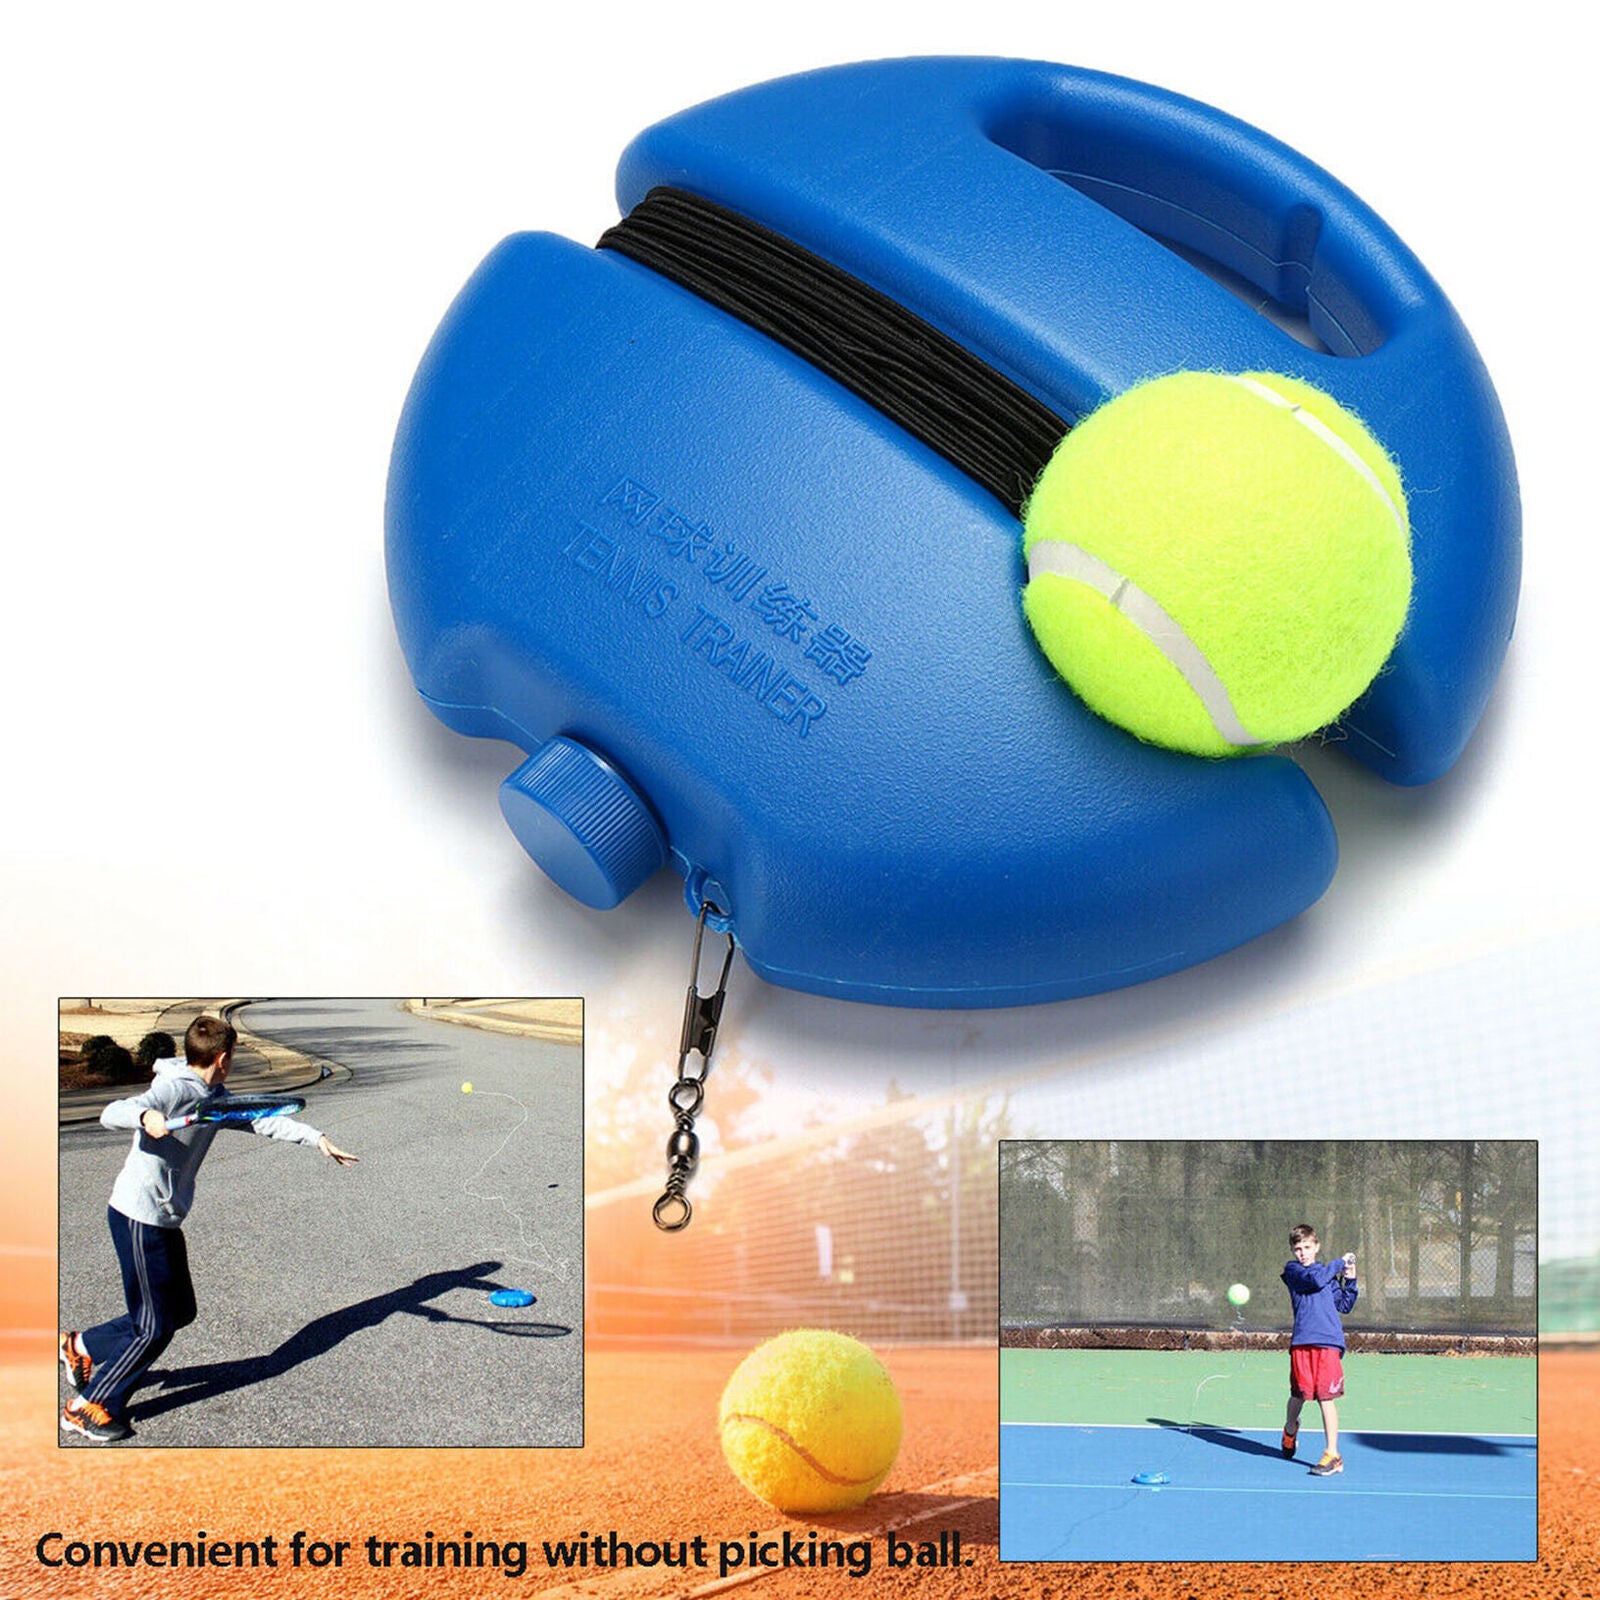 Singles Tennis Training Practice Ball Baseboard Base Trainer + String Tennis new